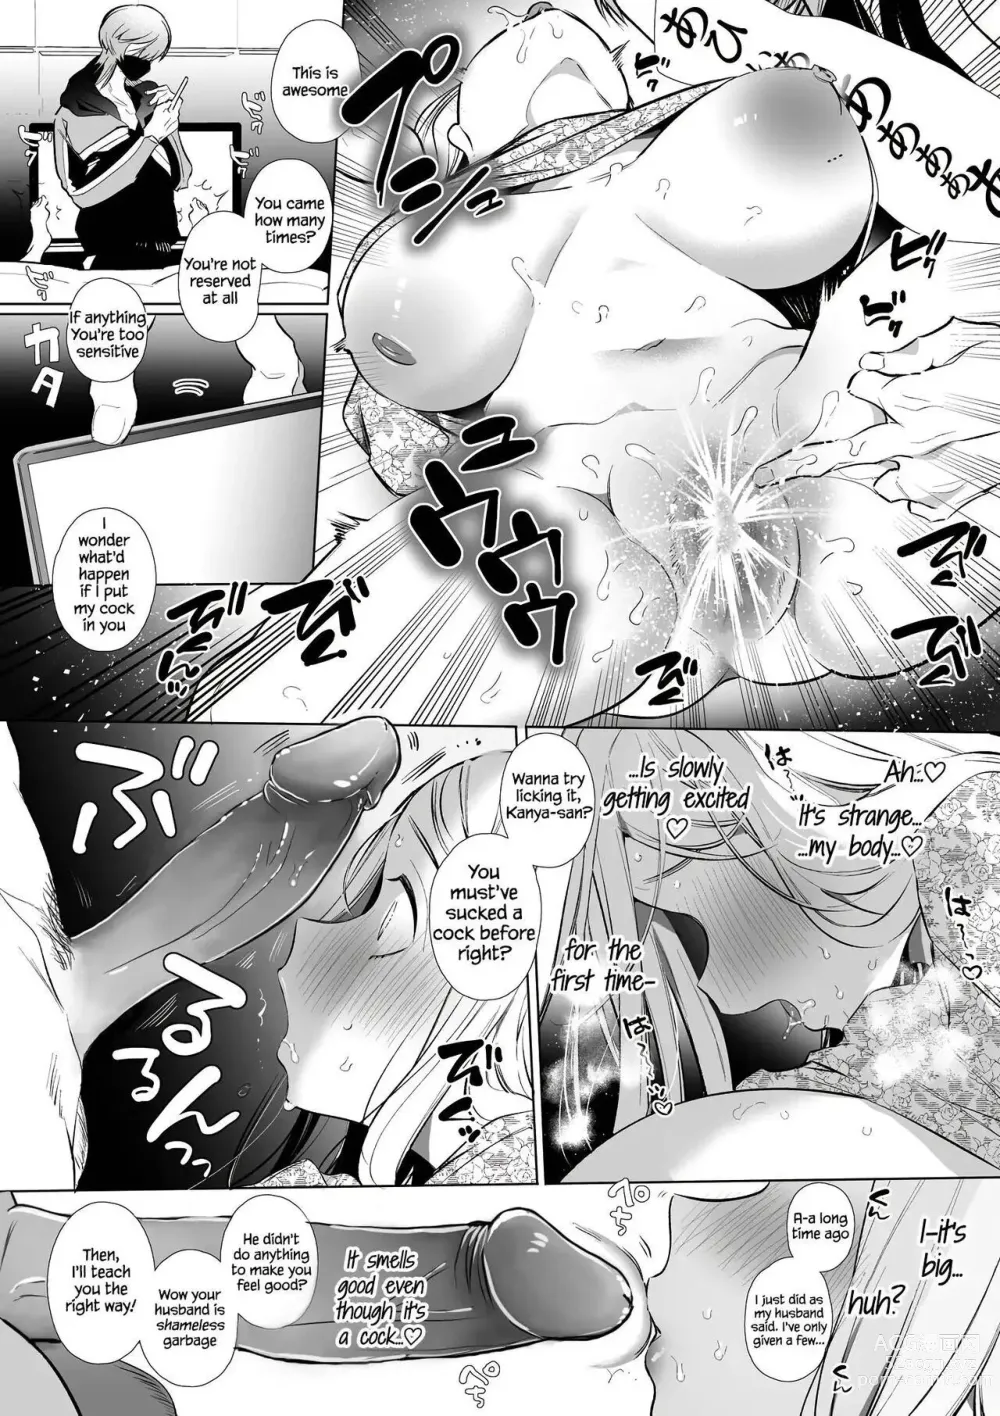 Page 26 of doujinshi Kana-san NTR ~ Degradation of a Housewife by a Guy in an Alter Account ~ (decensored)